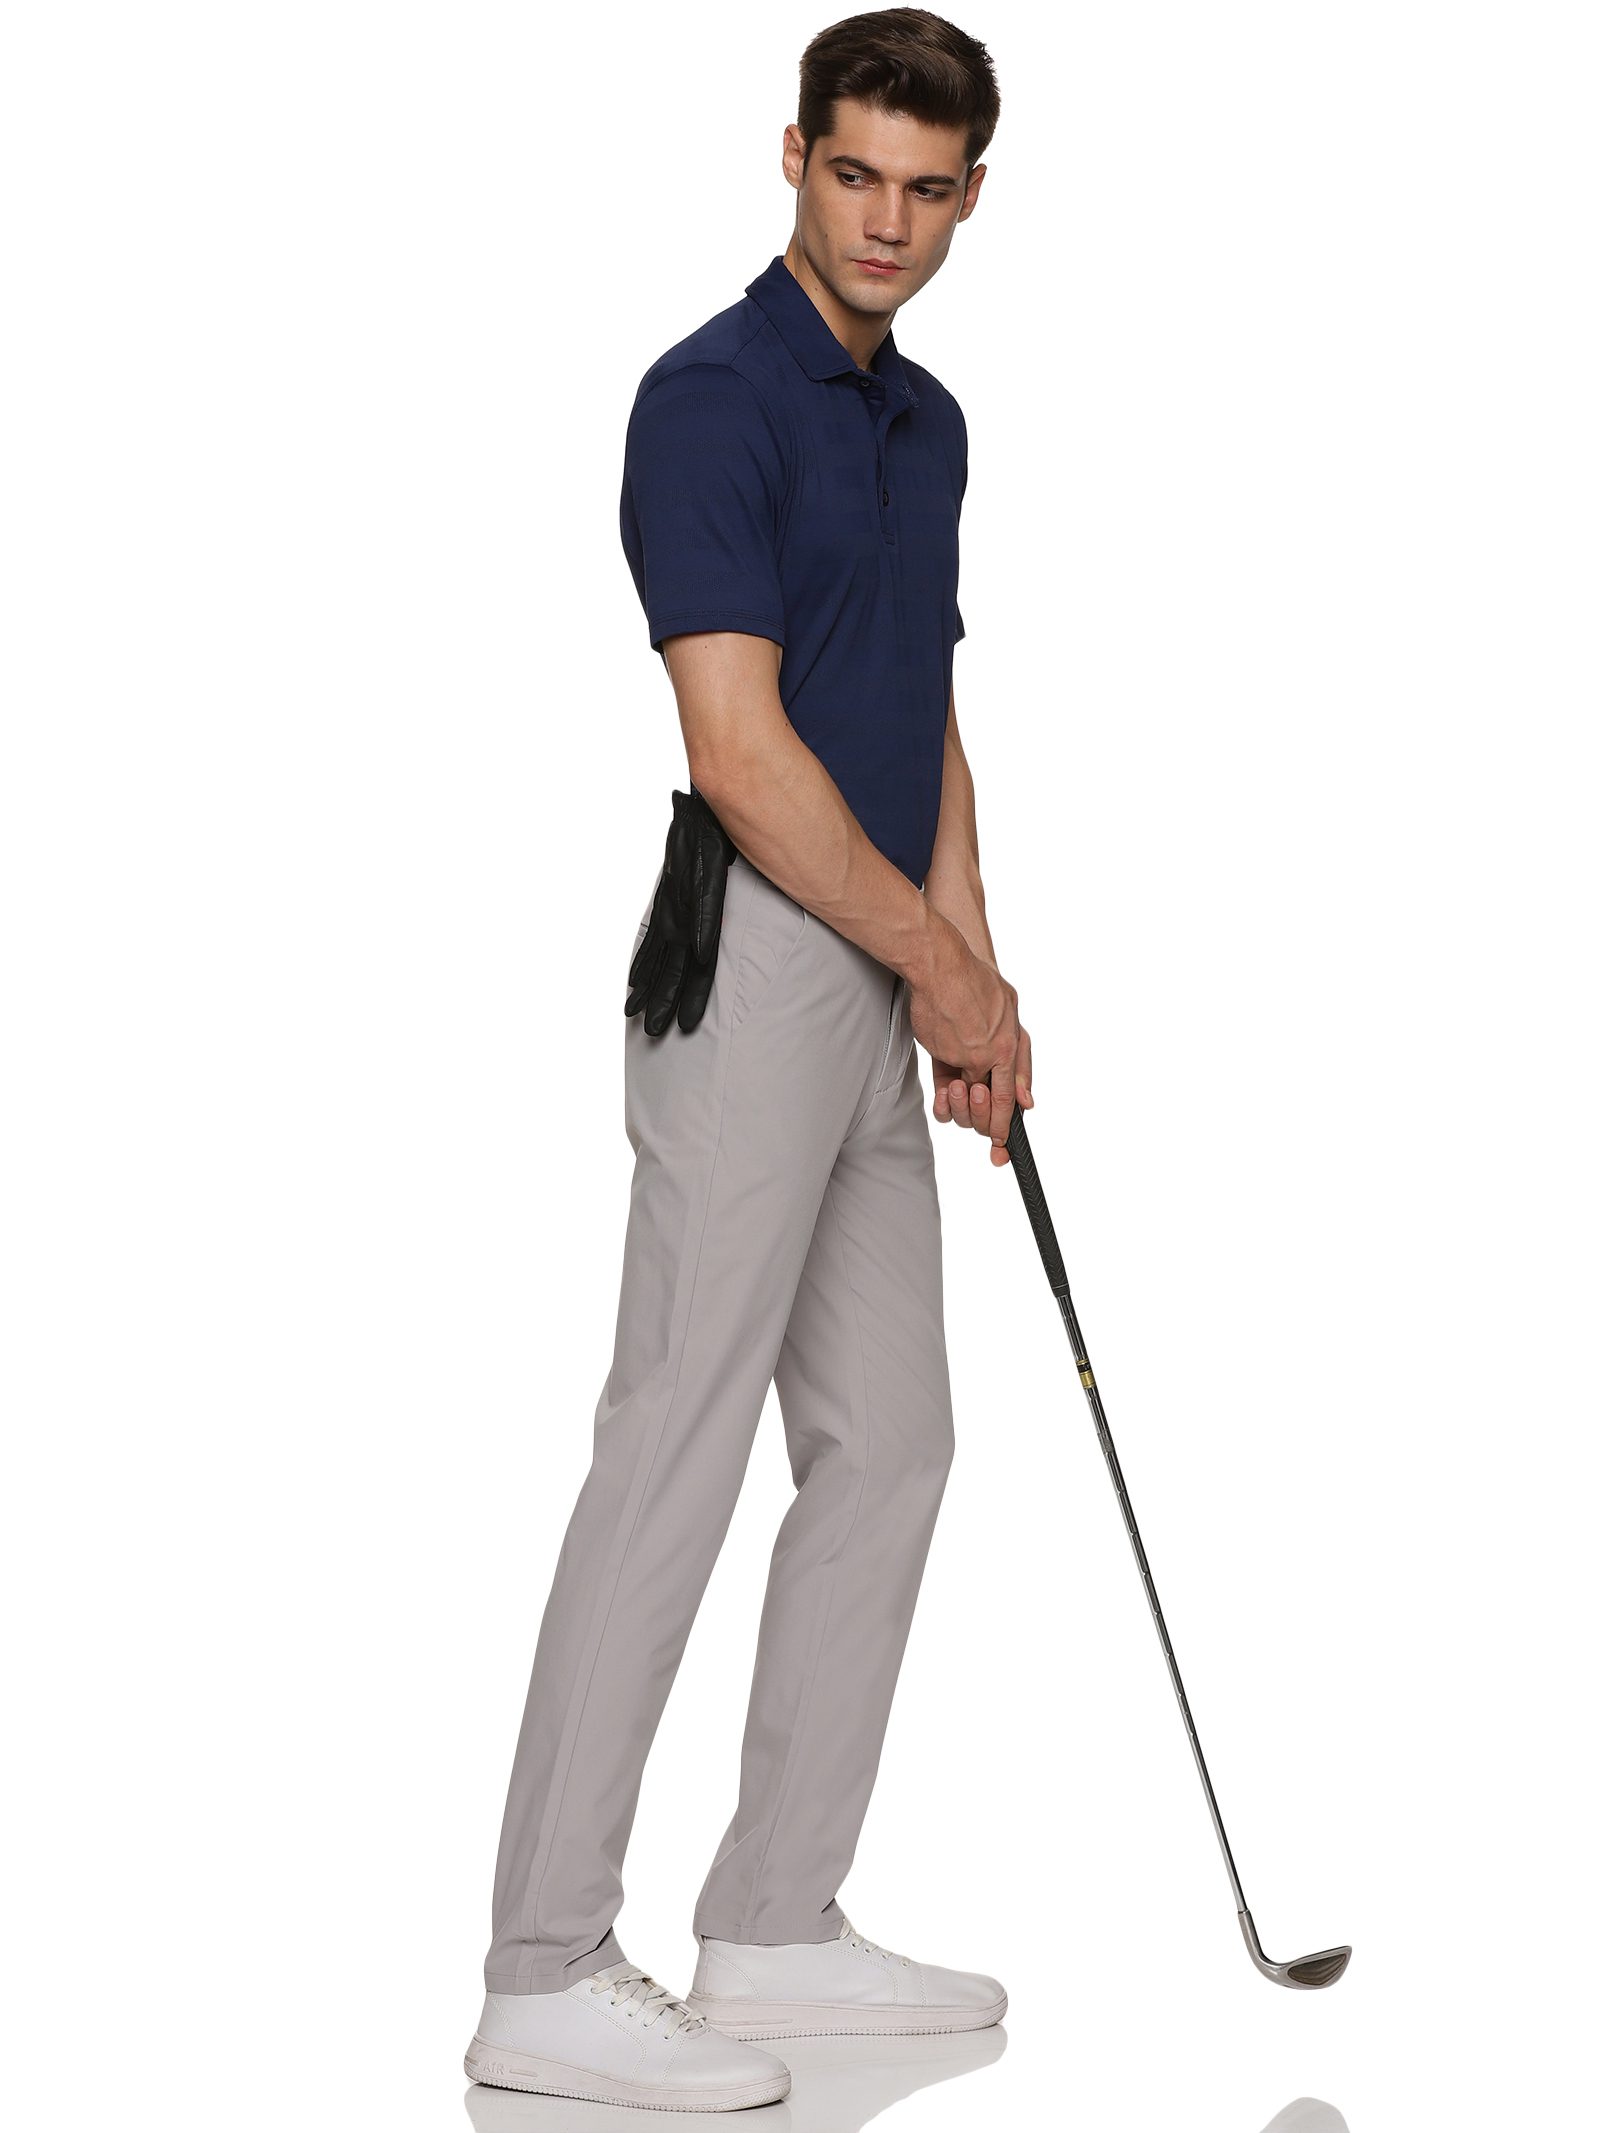 Buy Golf Trousers Online at Best Price in India  Golfoycom